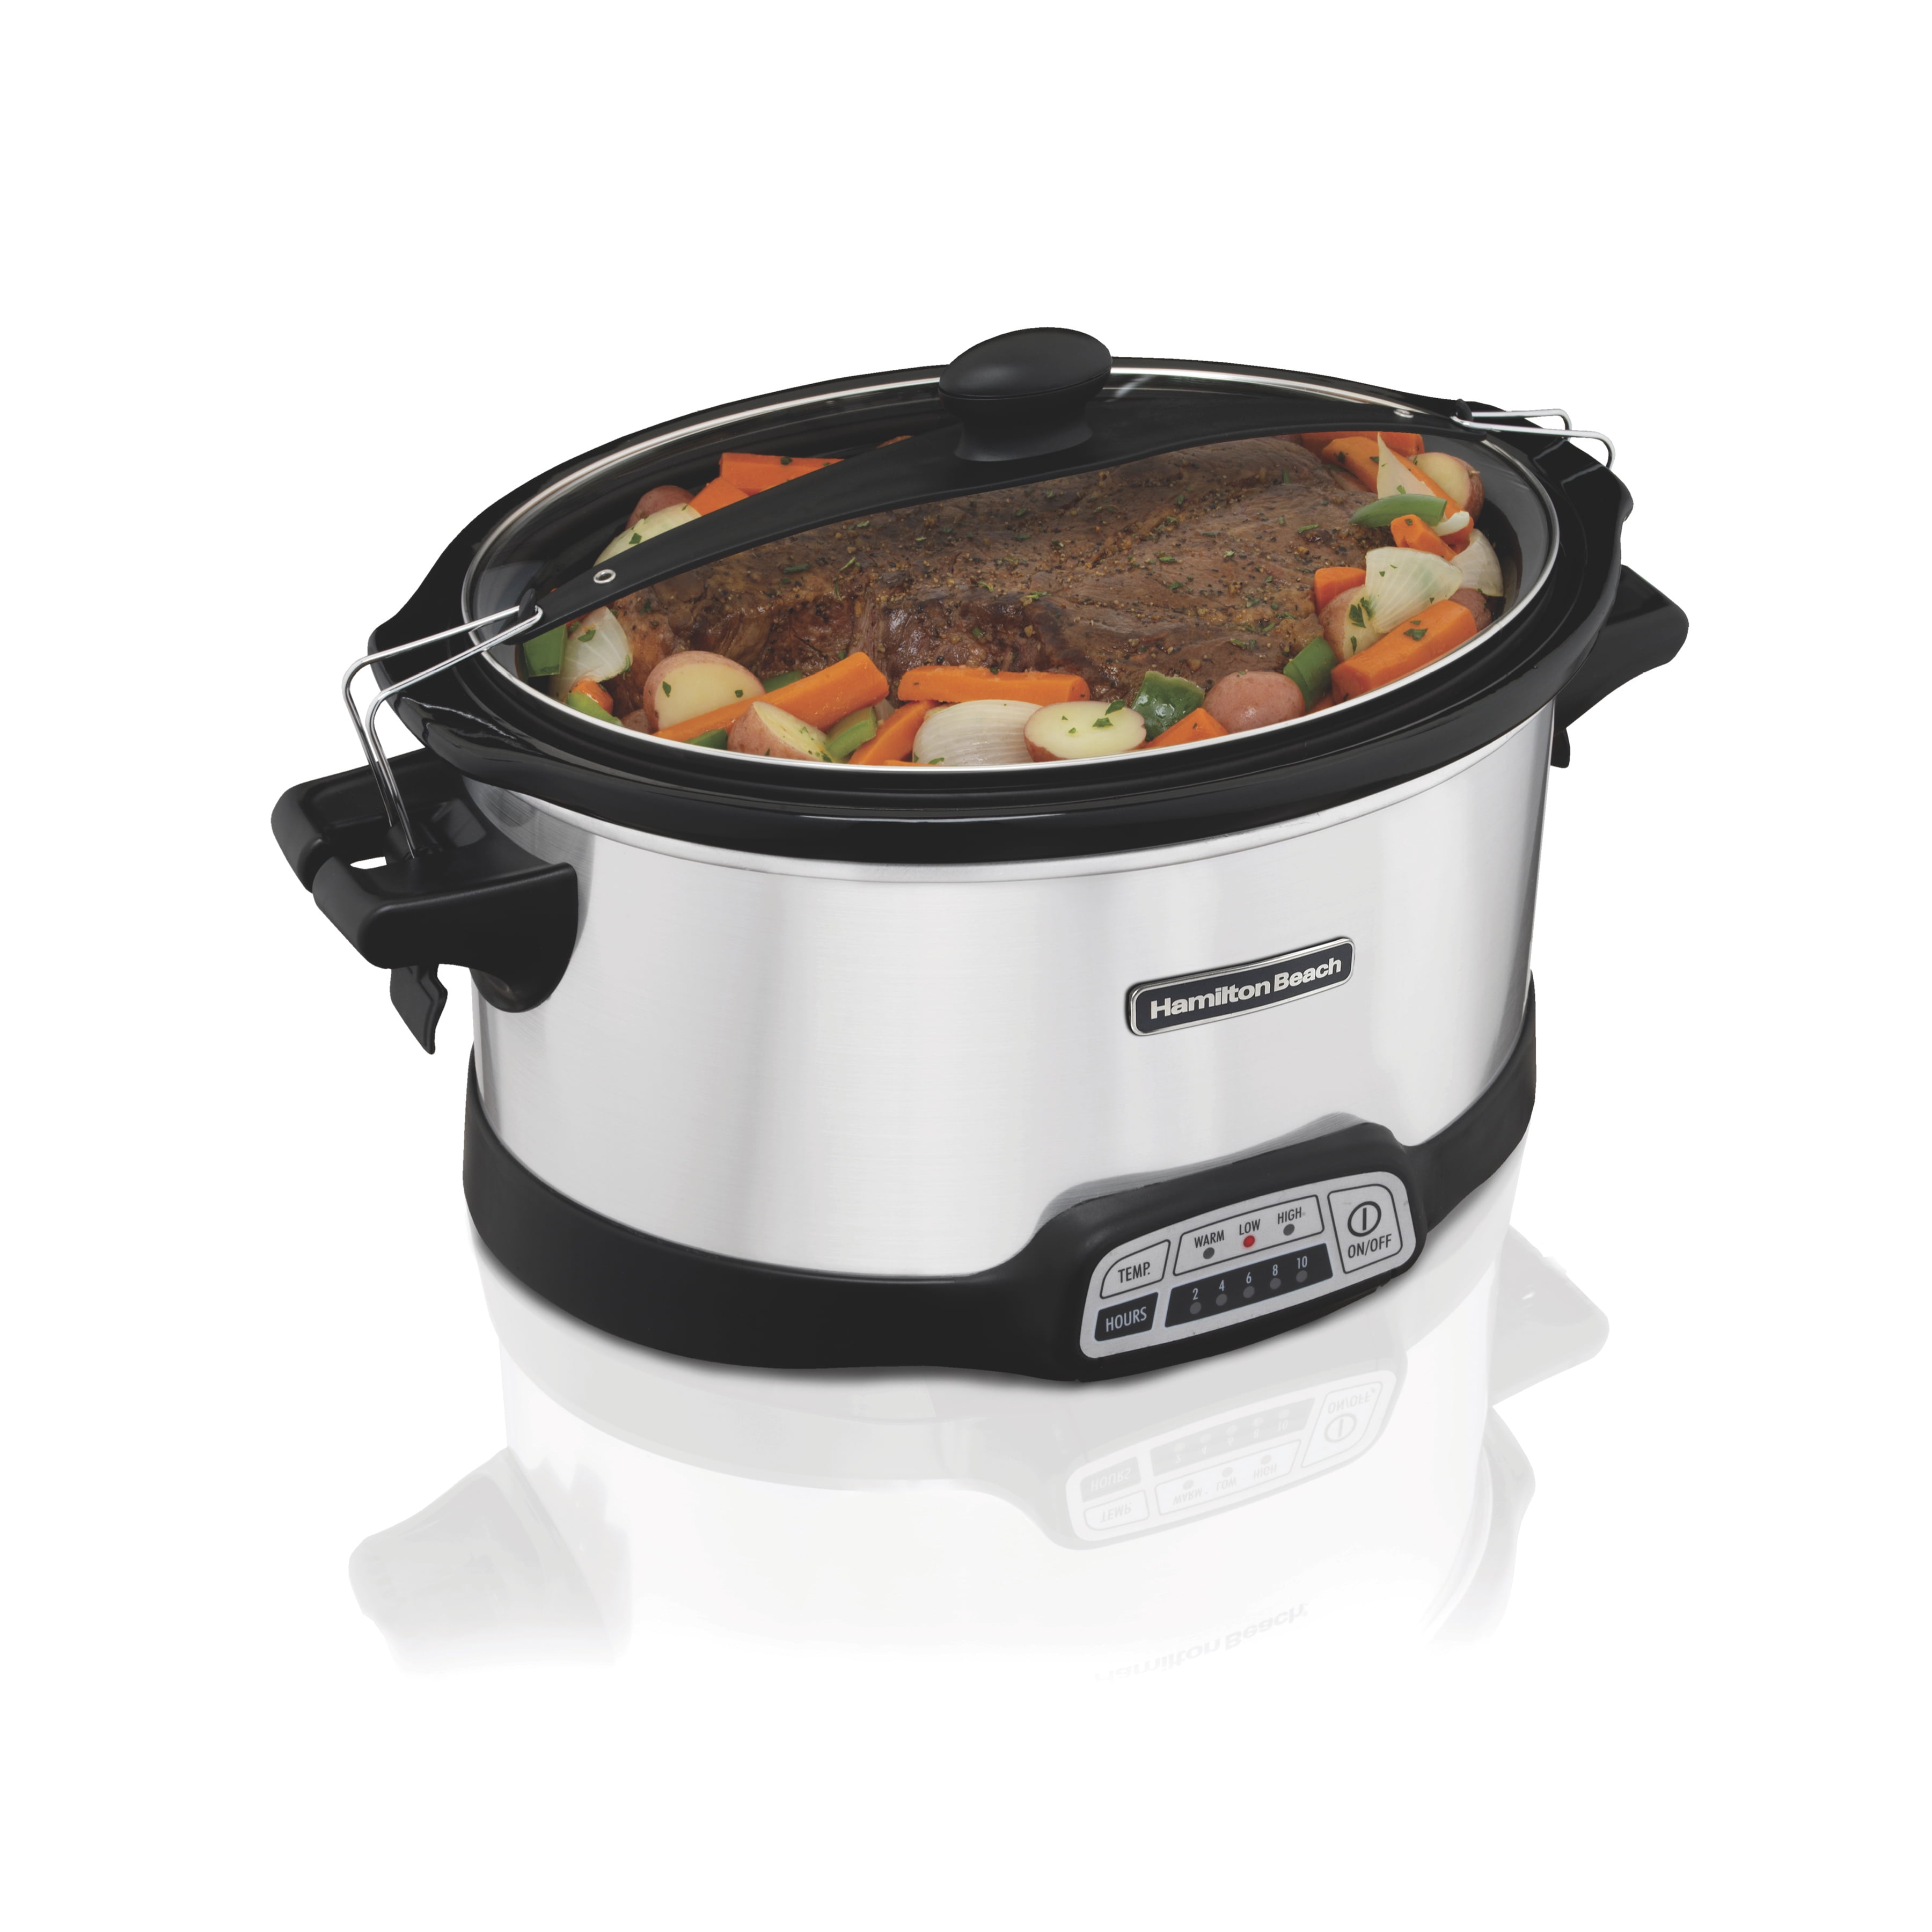 Portable 6 Quart Set & Programmable Slow Cooker with Lid Lock